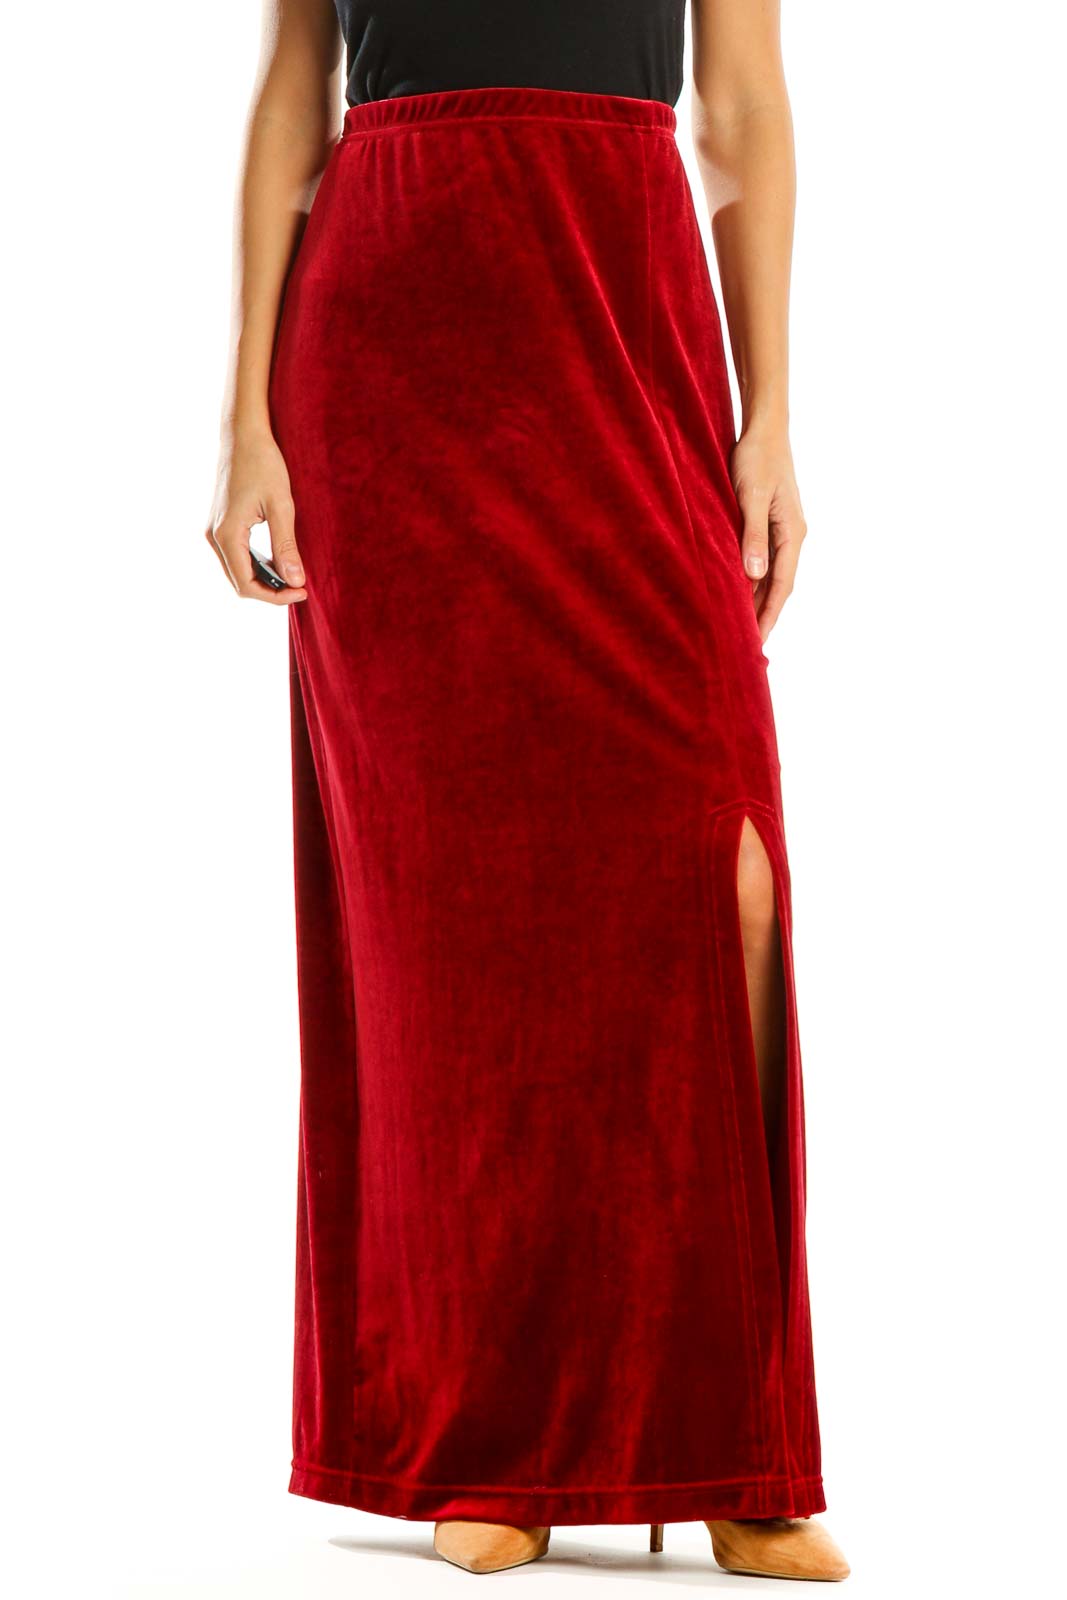 Red Textured Classic Straight Skirt Front